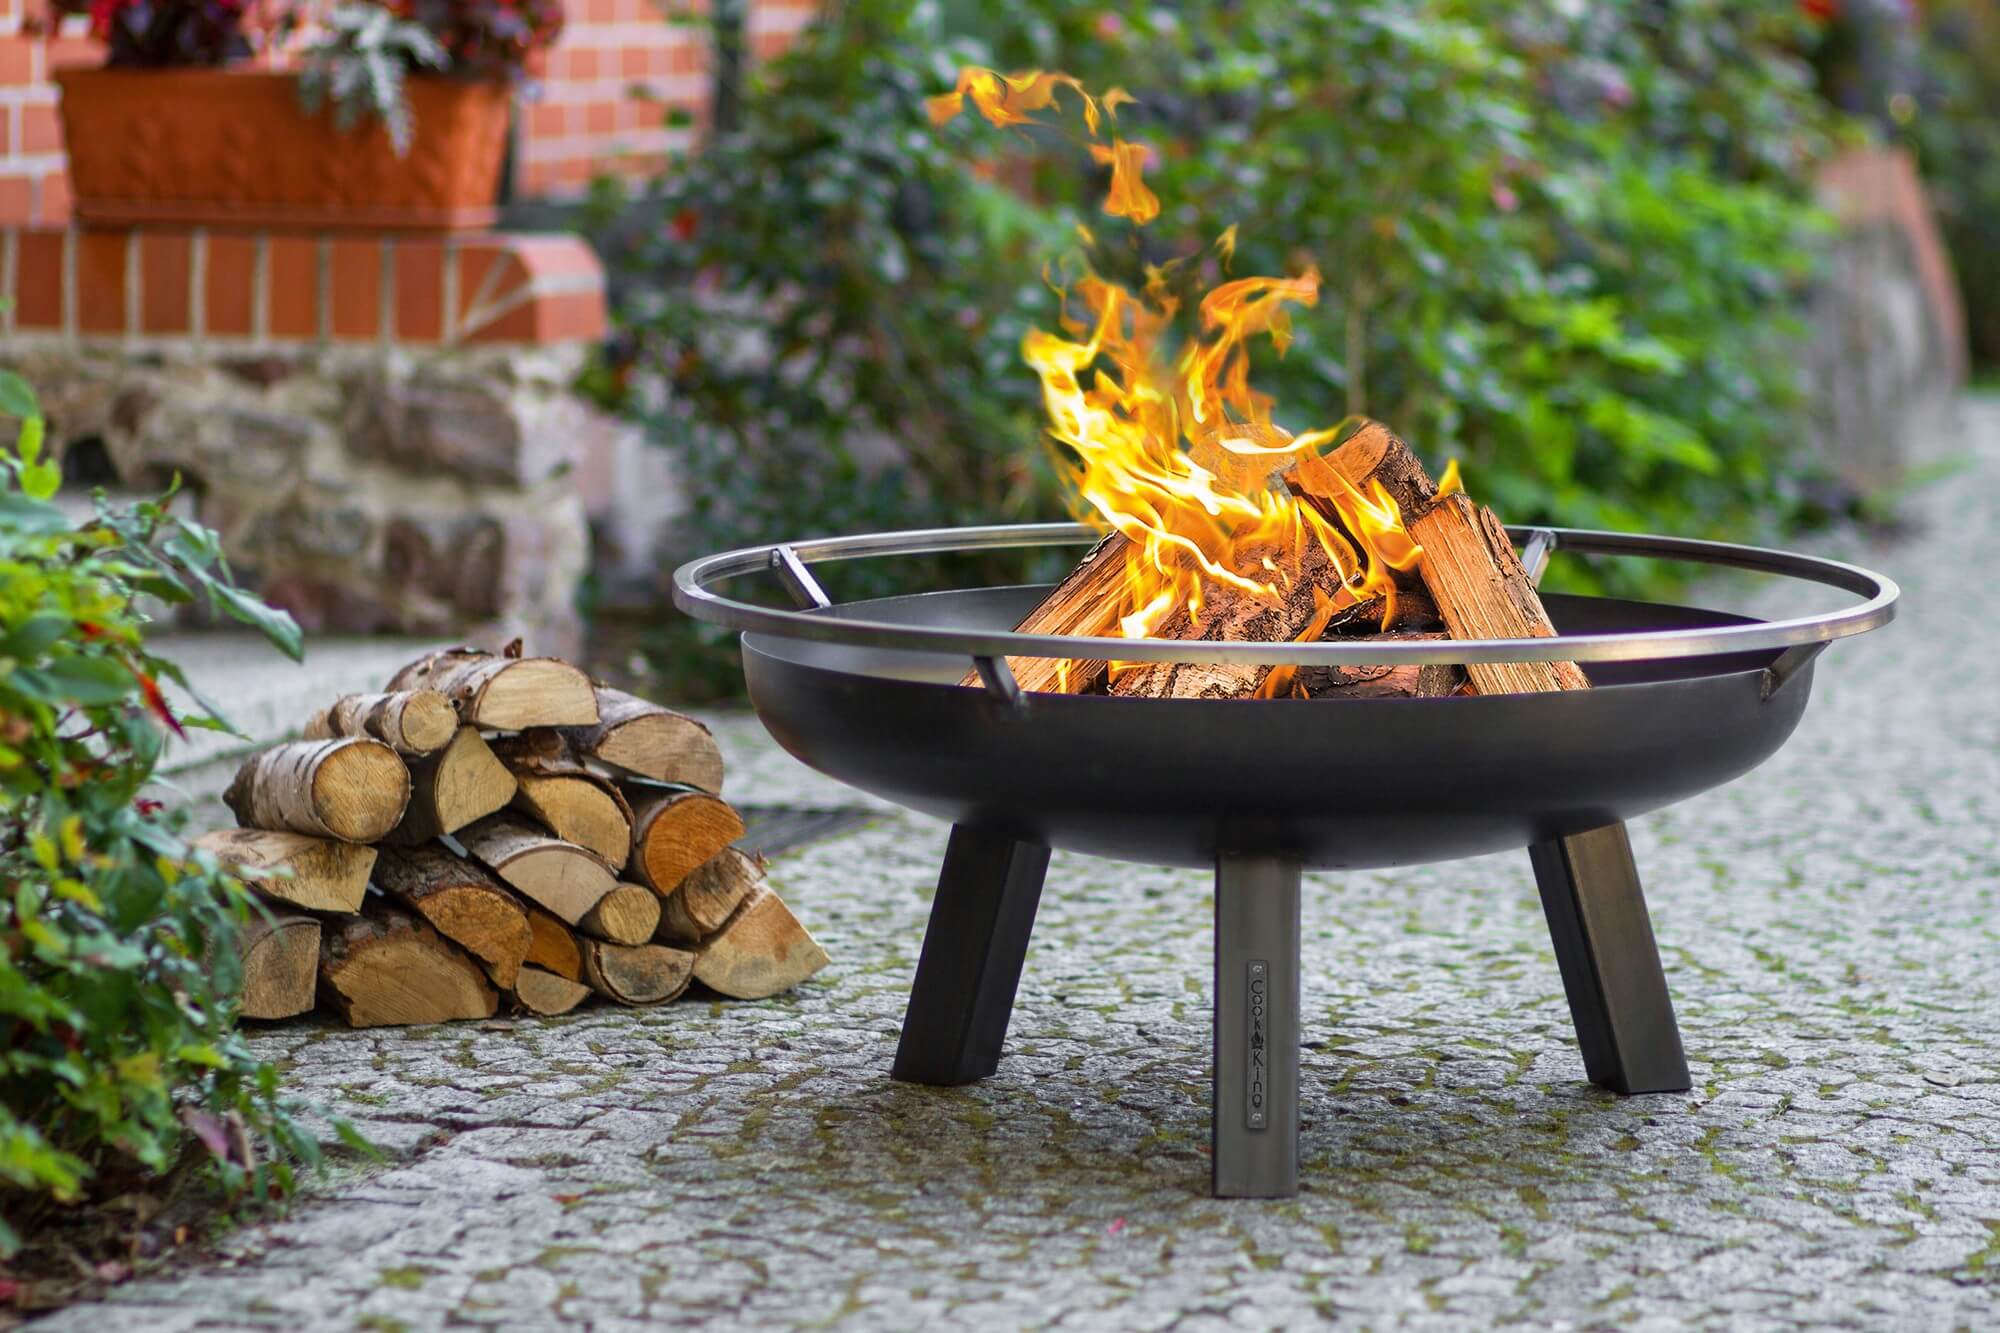 How High Should A Fire Pit Be